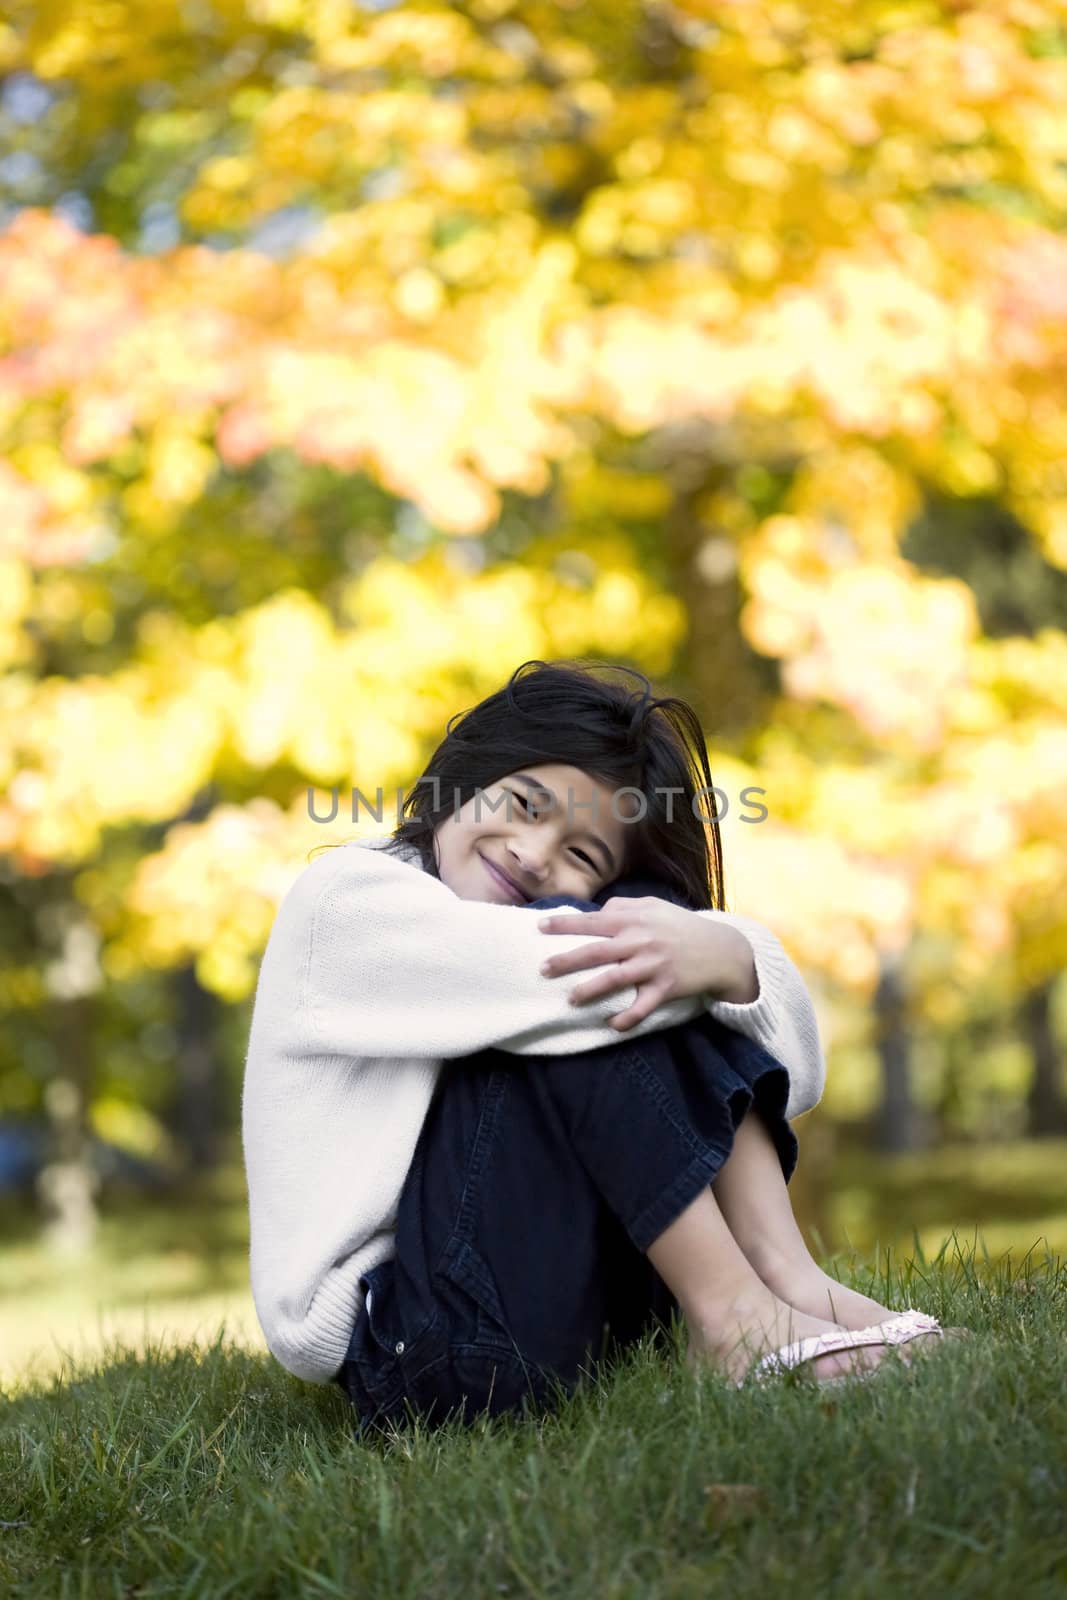 Little girl hugging knees sitting on lawn against bright autumn leaves in background